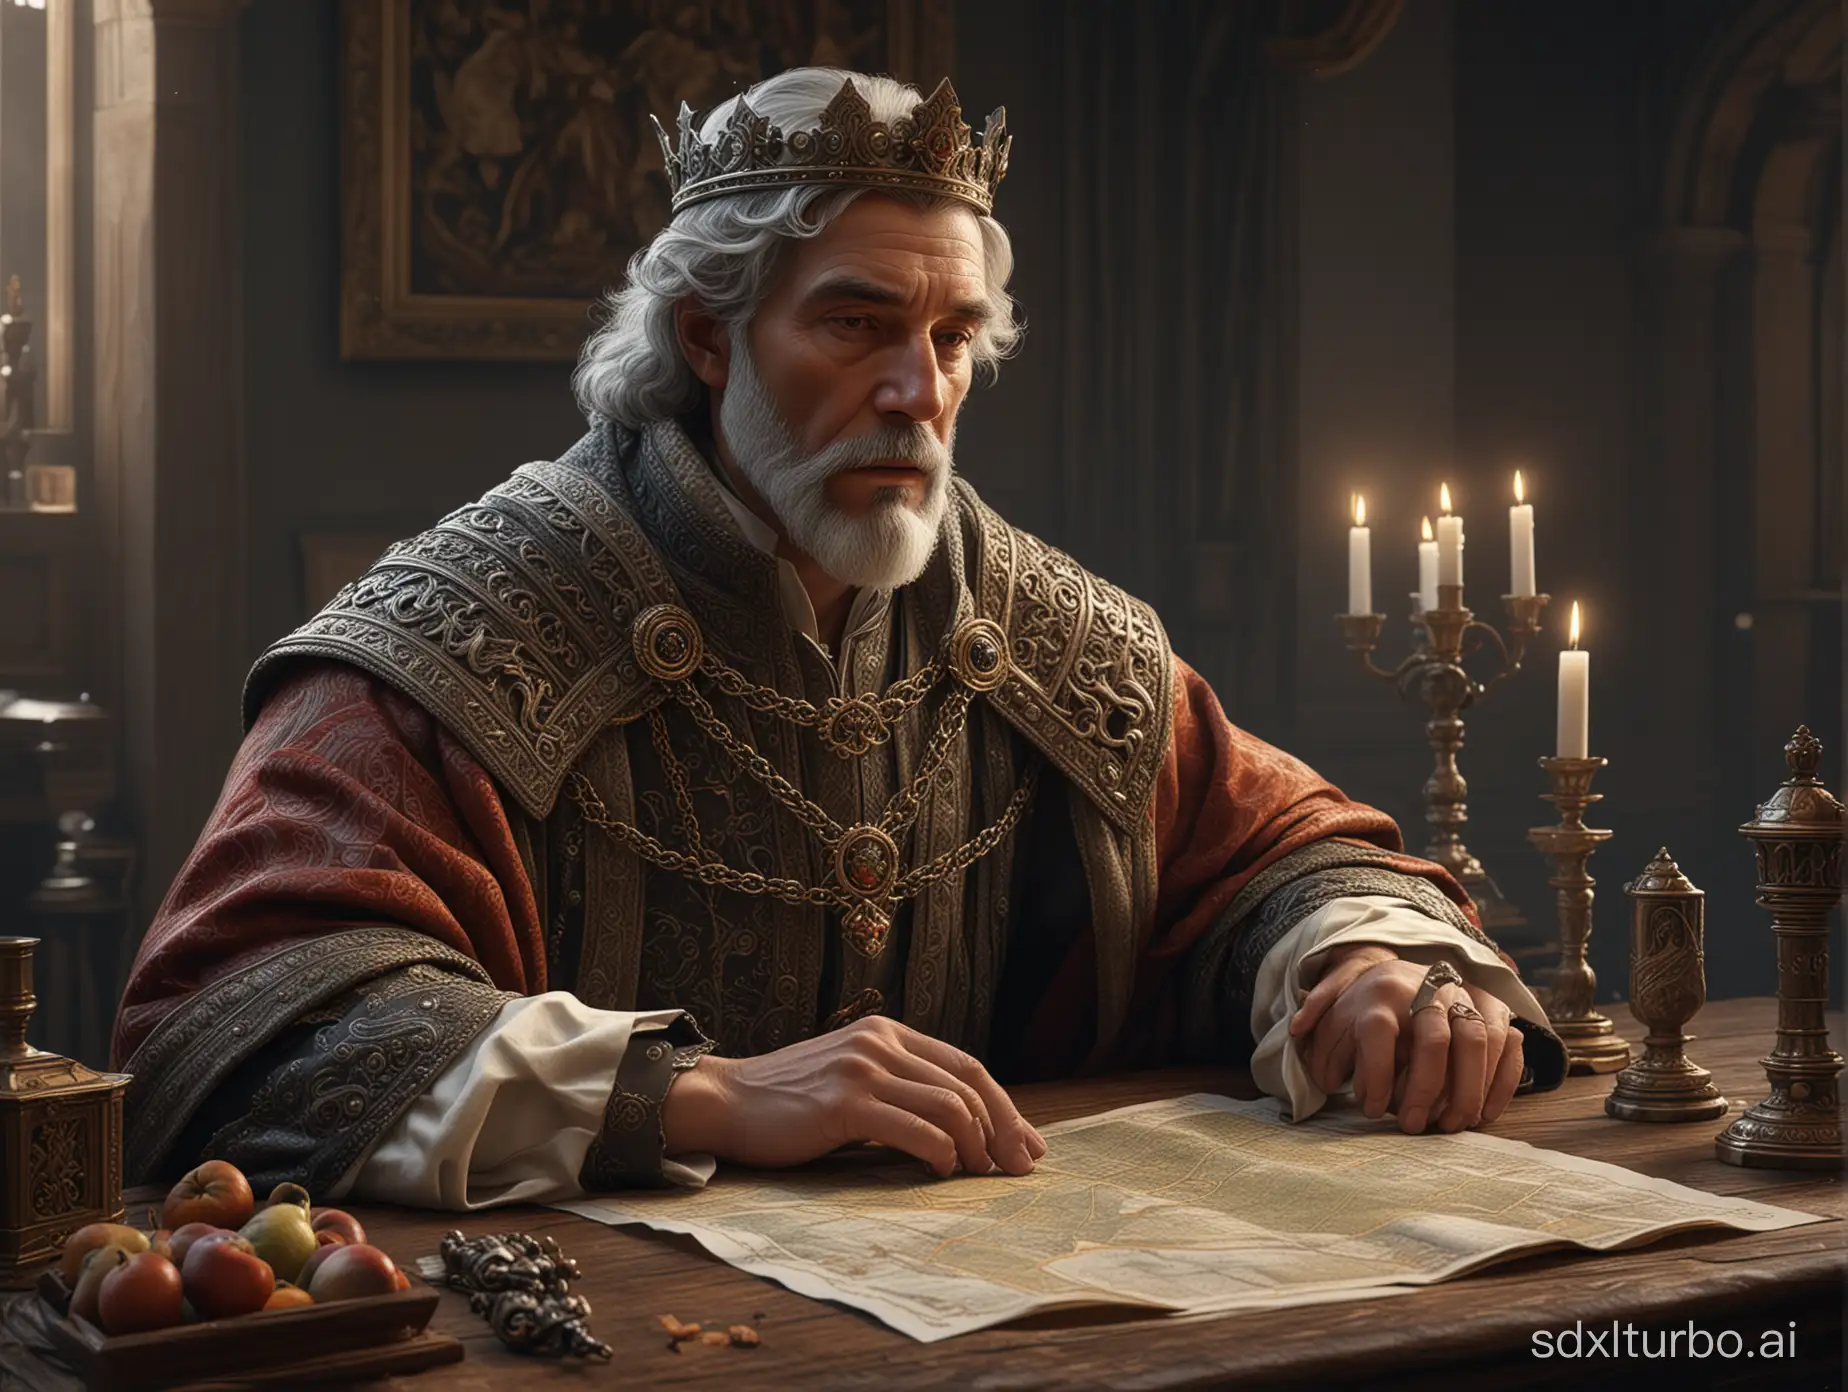 Majestic-King-in-Royal-Attire-Planning-Strategy-at-Antique-Map-Table